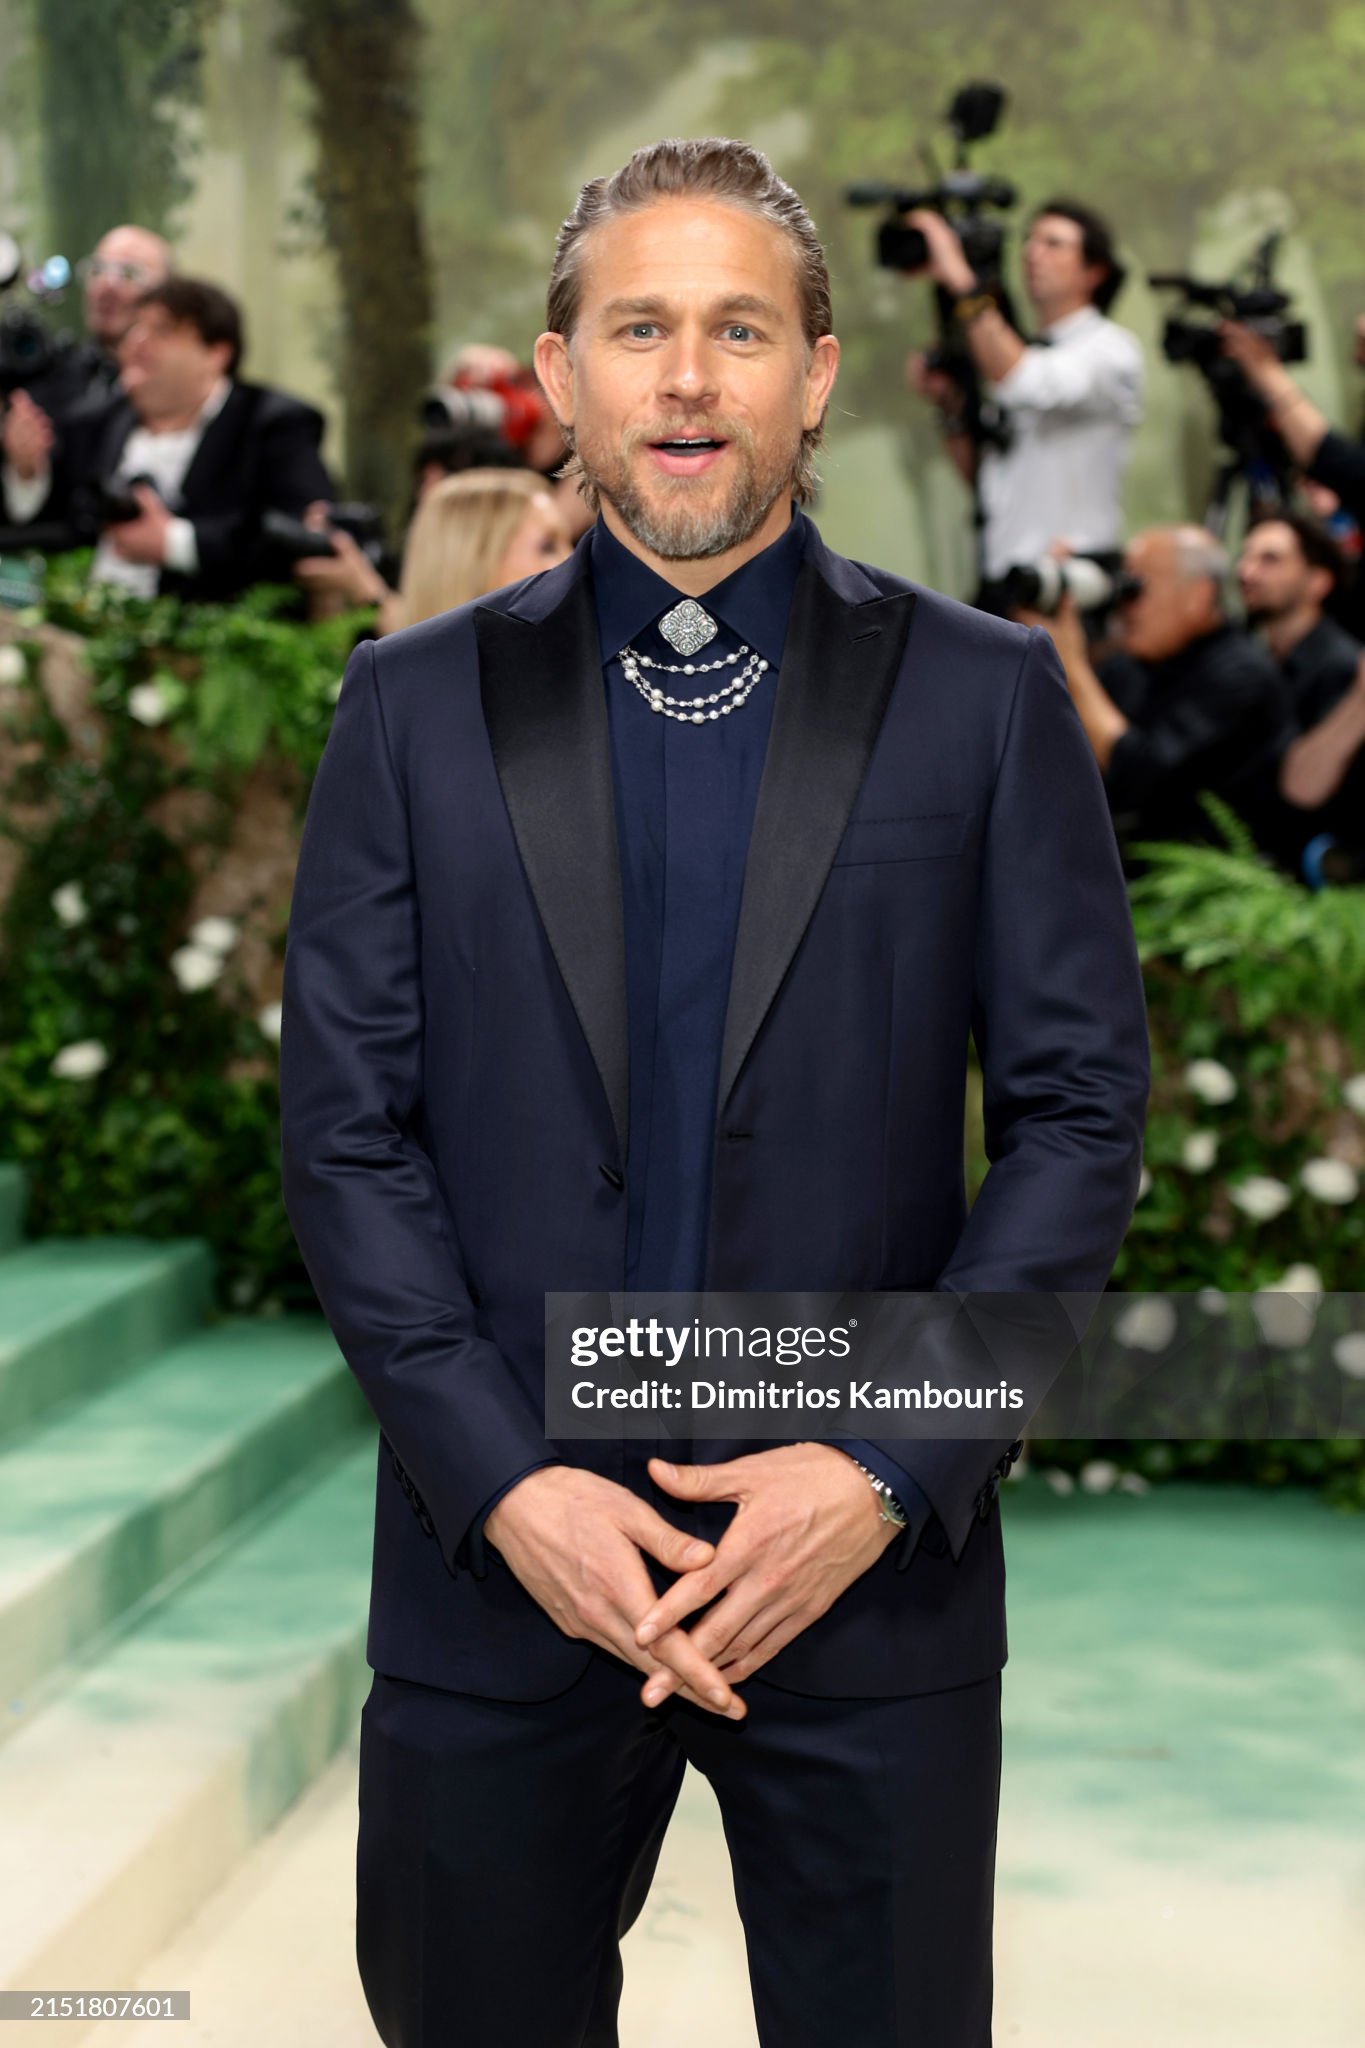 gettyimages-2151807601-2048x2048.jpg